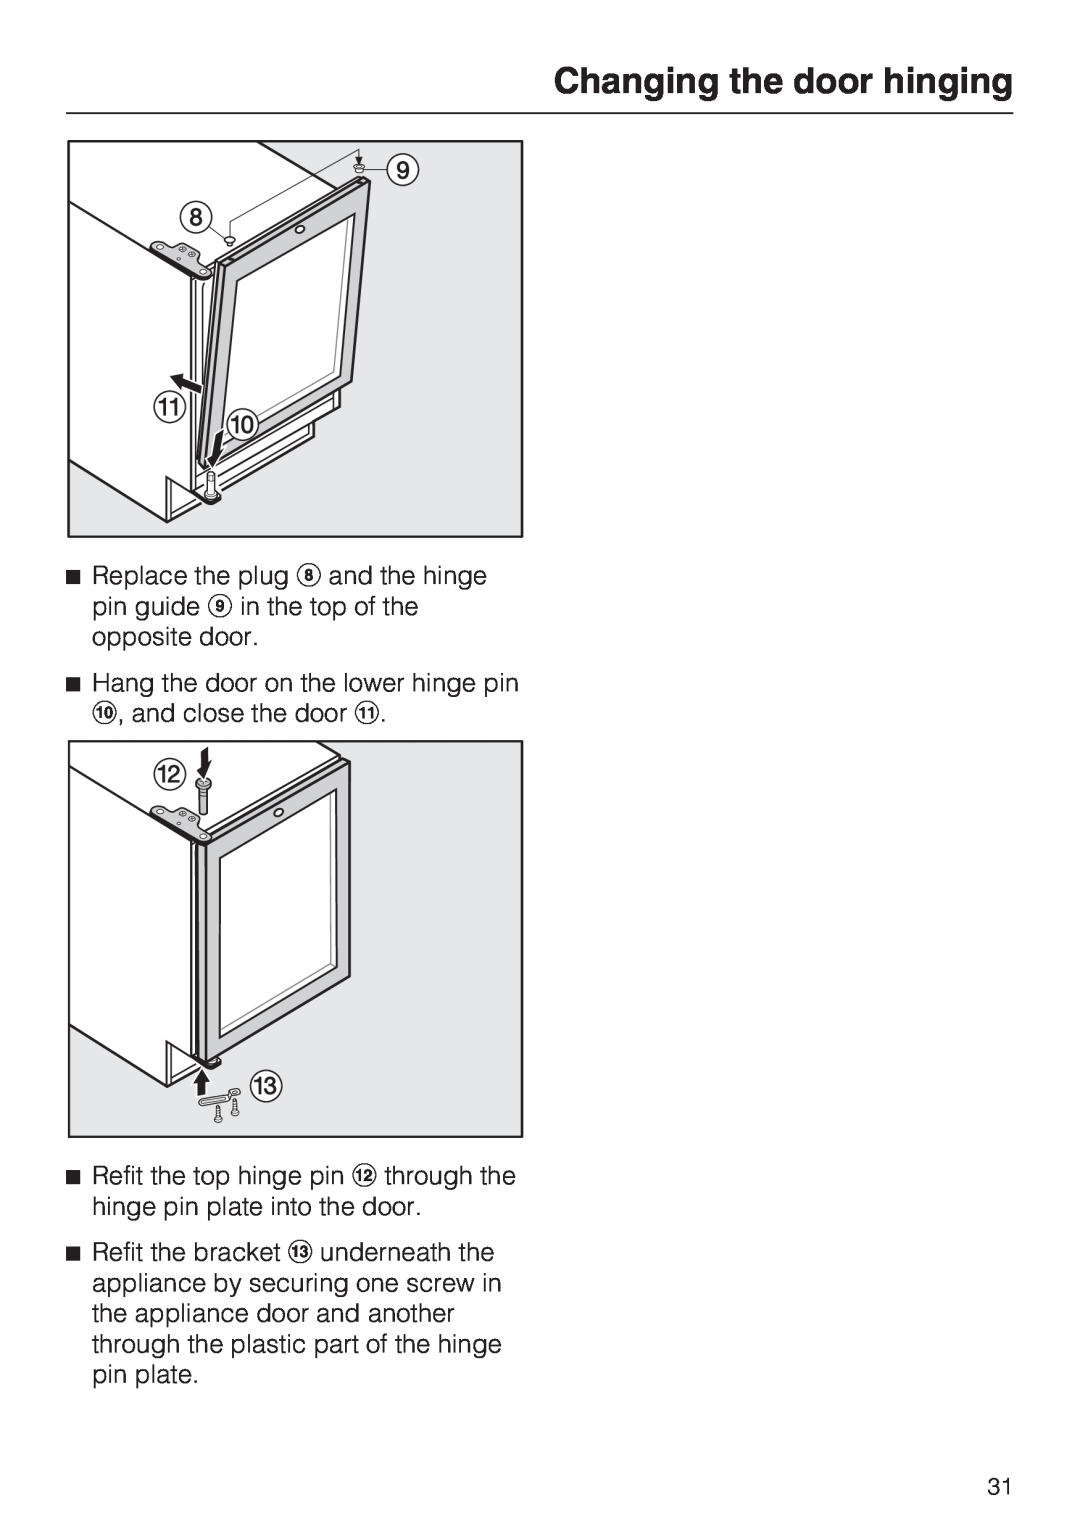 Miele KWT 4154 UG-1 Changing the door hinging, Replace the plug and the hinge pin guide in the top of the opposite door 